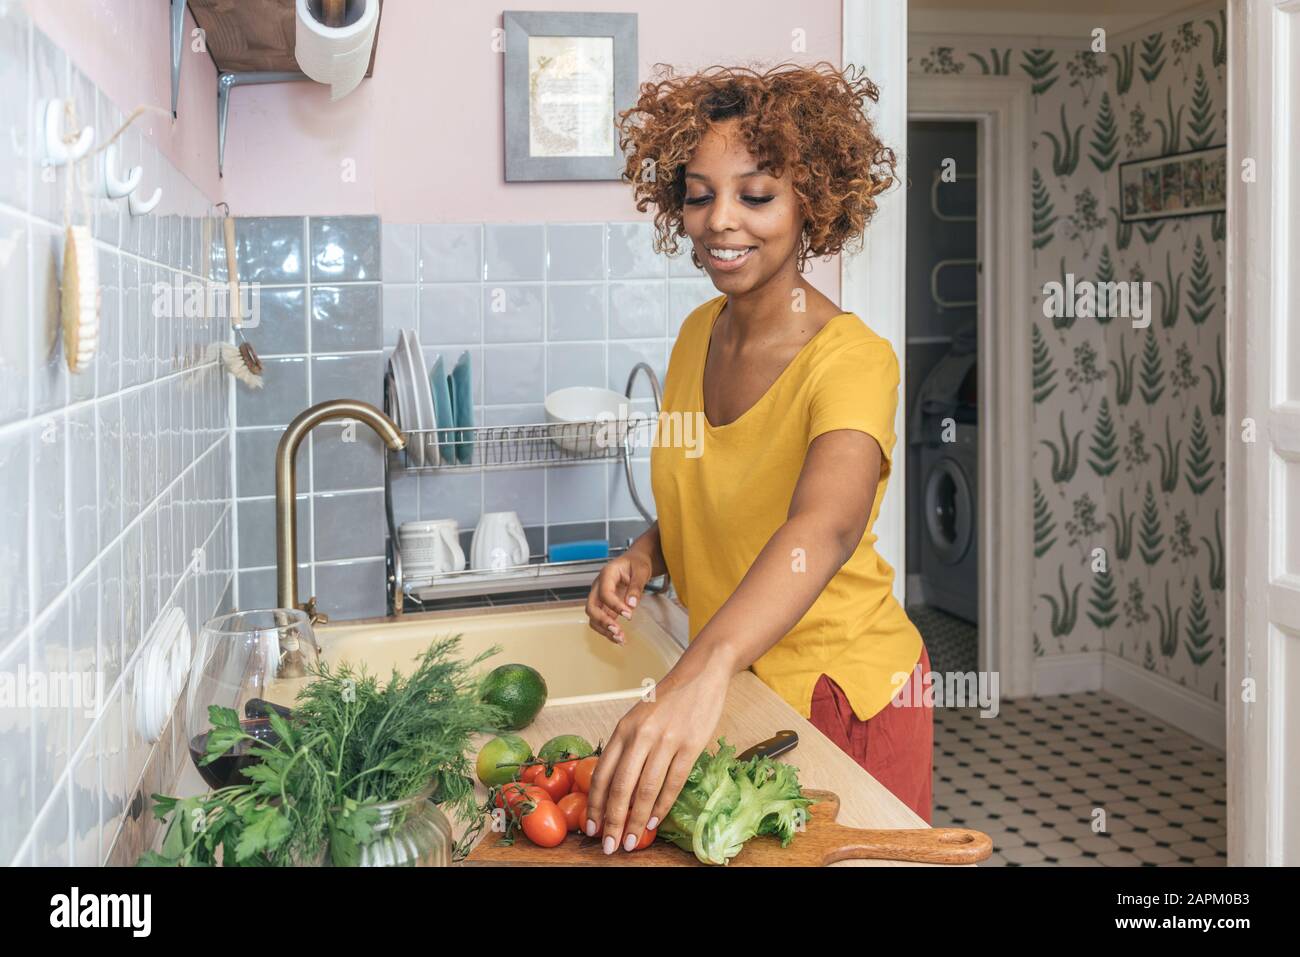 Young woman in kitchen preparing healthy meal Stock Photo